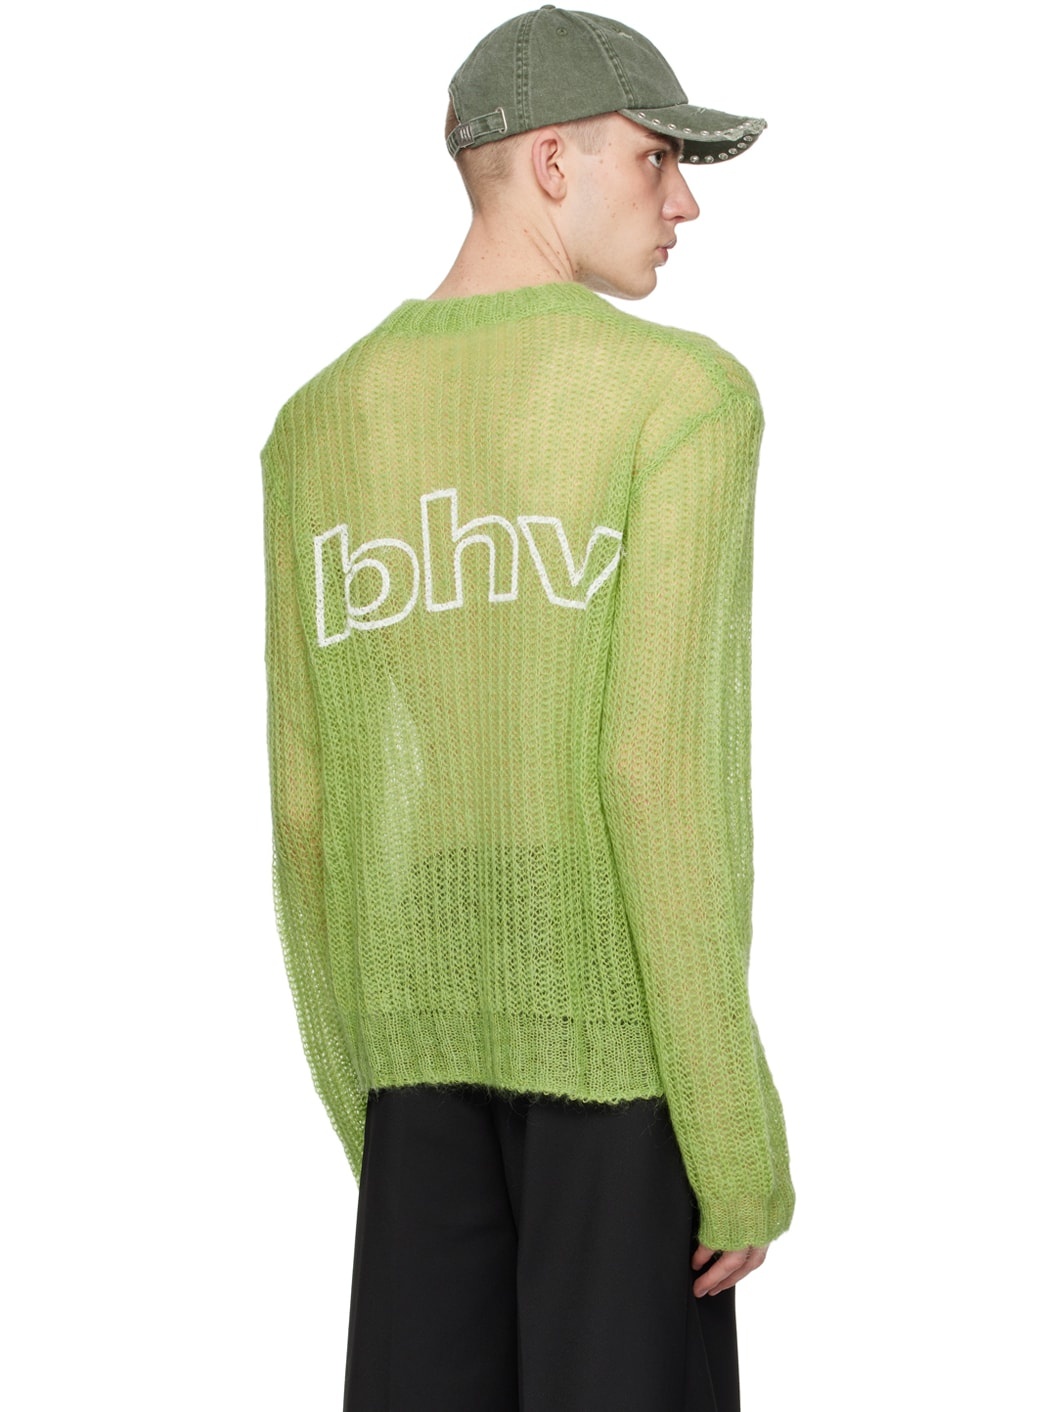 Green Unbrushed Sweater - 3